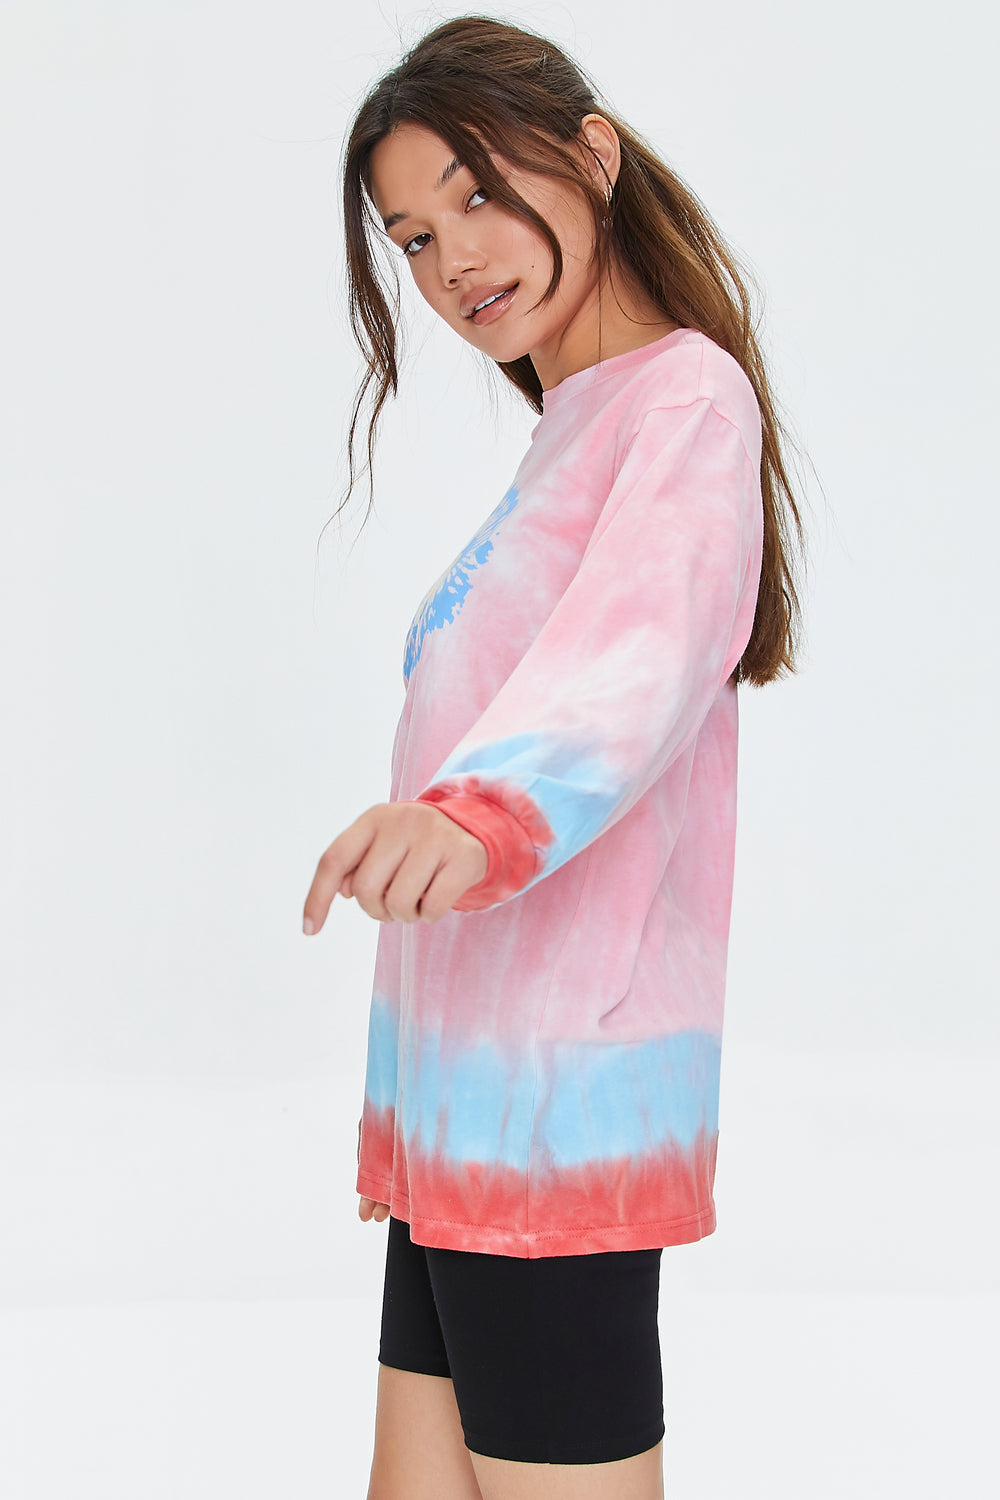 Aloha Graphic Ombre Tie-Dye Tee Pink